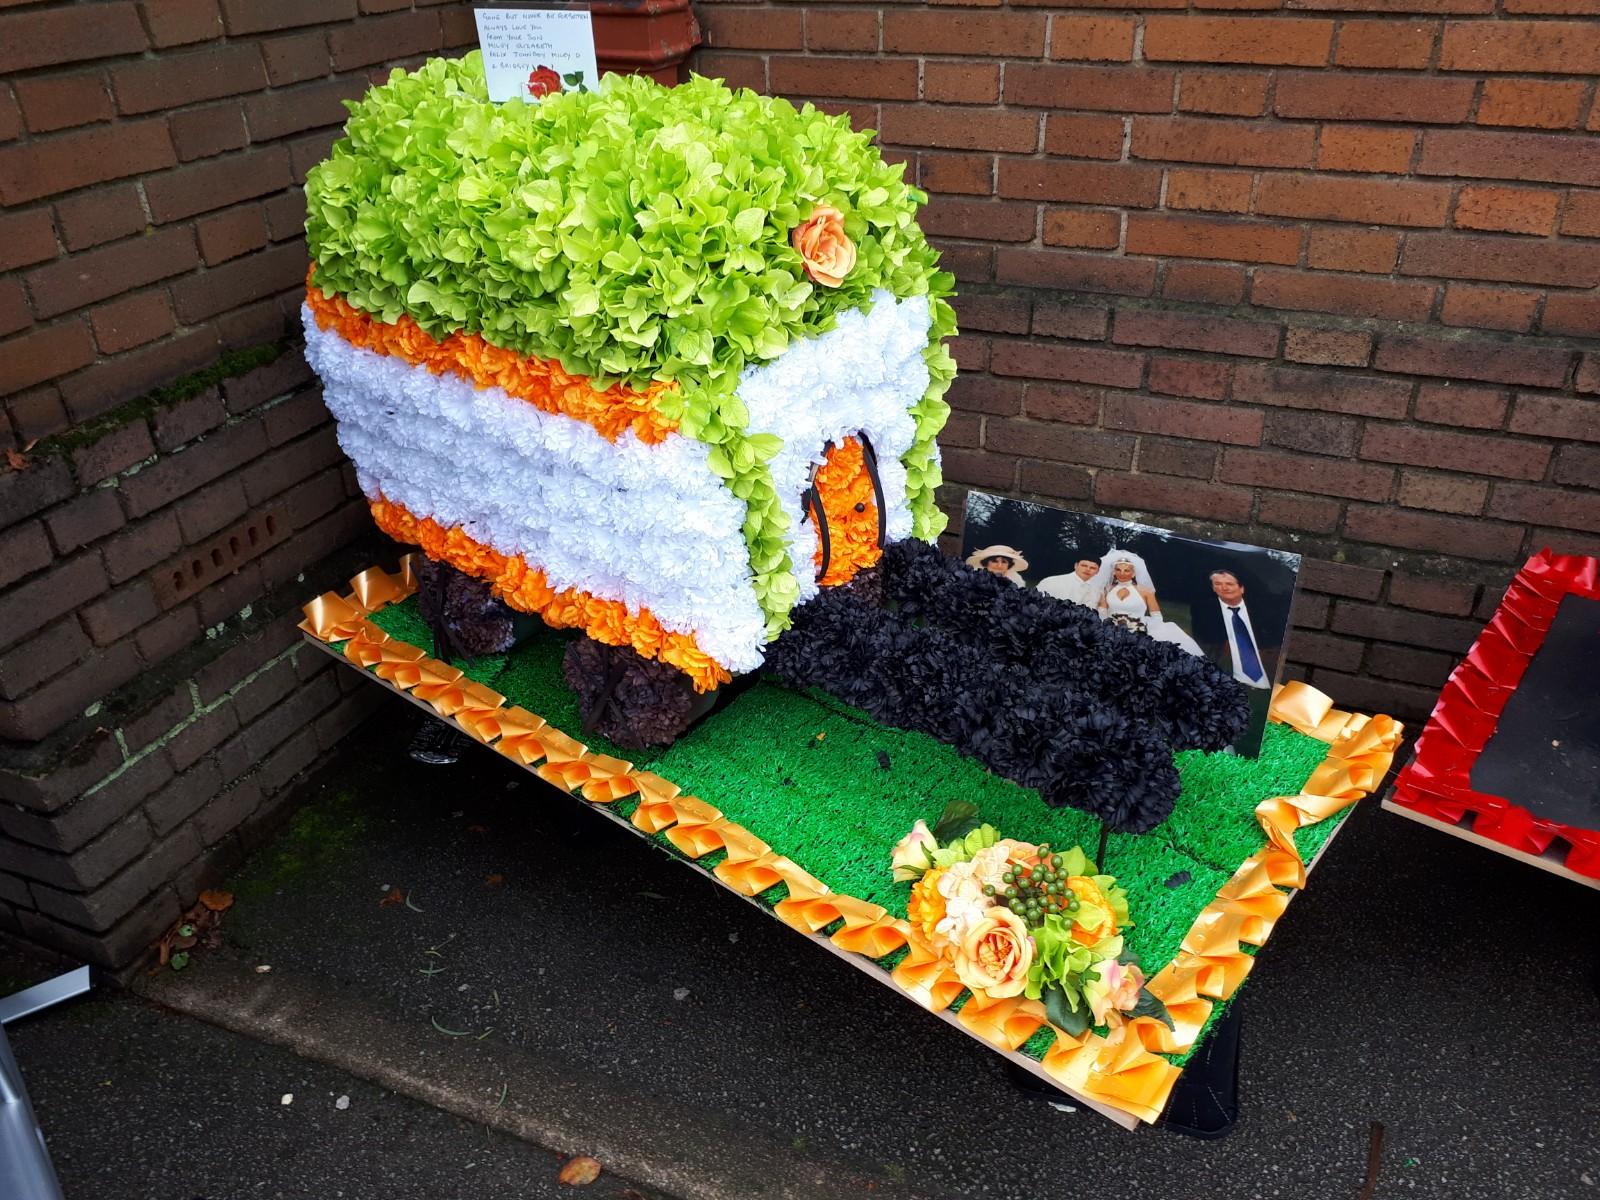 There were lots of Irish flags and colours and this floral decoration of a traditional Gypsy caravan